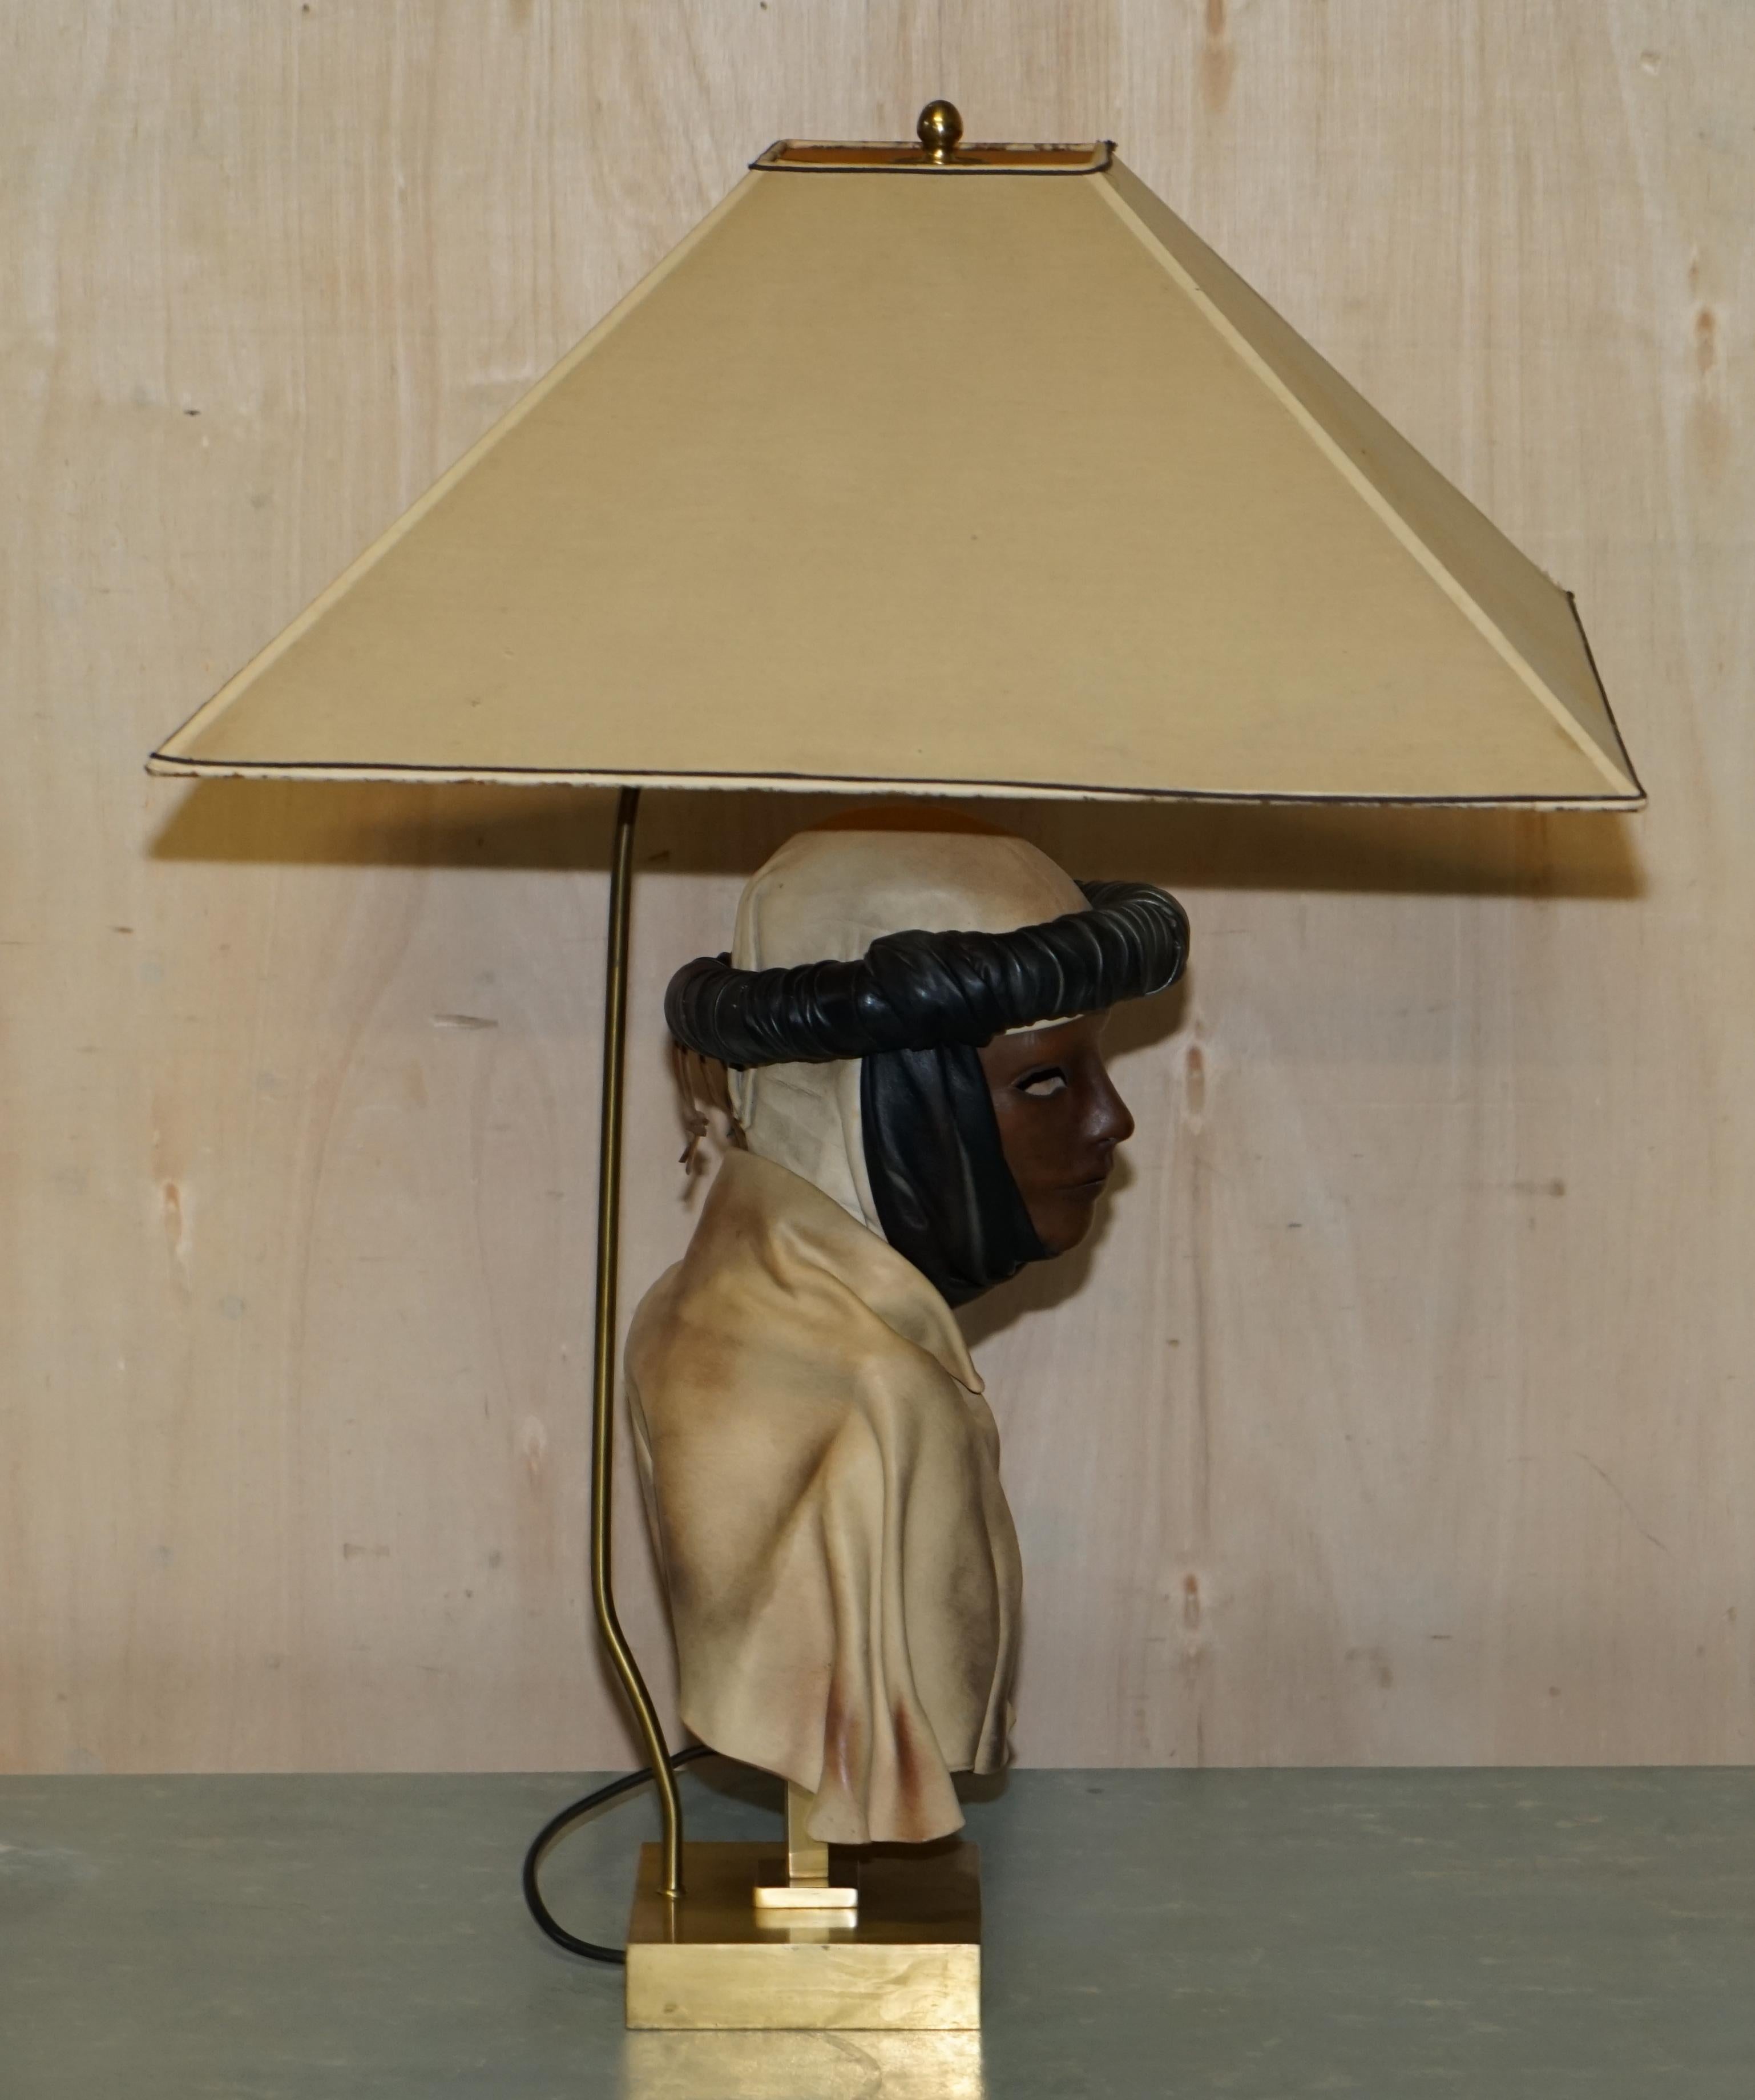 Midcentury Arabian Face Lamp Signed Pourbaix circa 1960s Must See Pictures For Sale 7